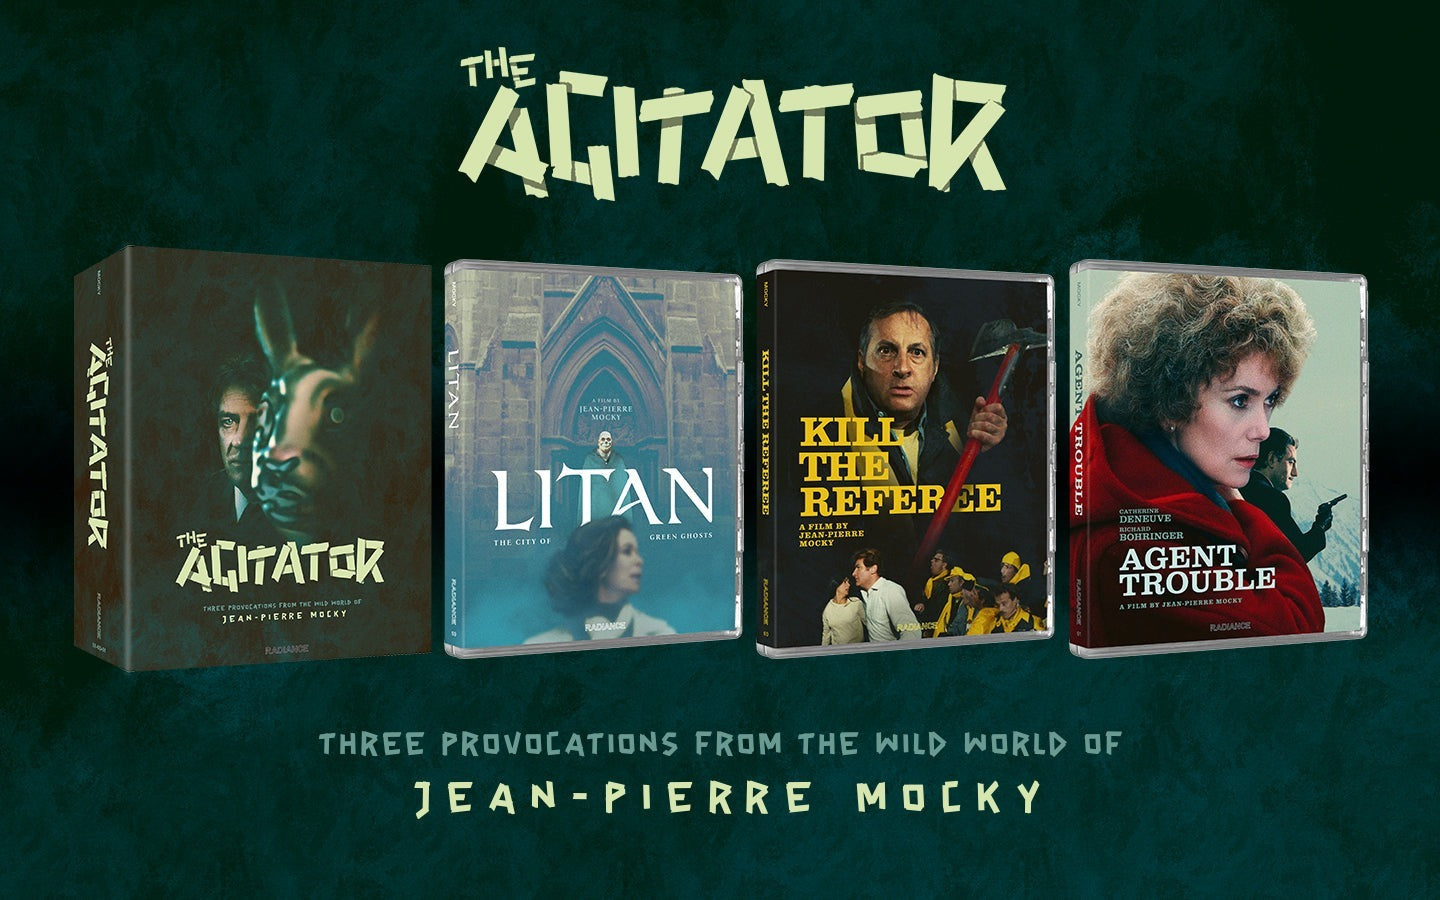 THE AGITATOR: THREE PROVOCATIONS FROM THE WILD WORLD OF JEAN-PIERRE MOCKY (REGION B IMPORT - LIMITED EDITION) BLU-RAY [PRE-ORDER]